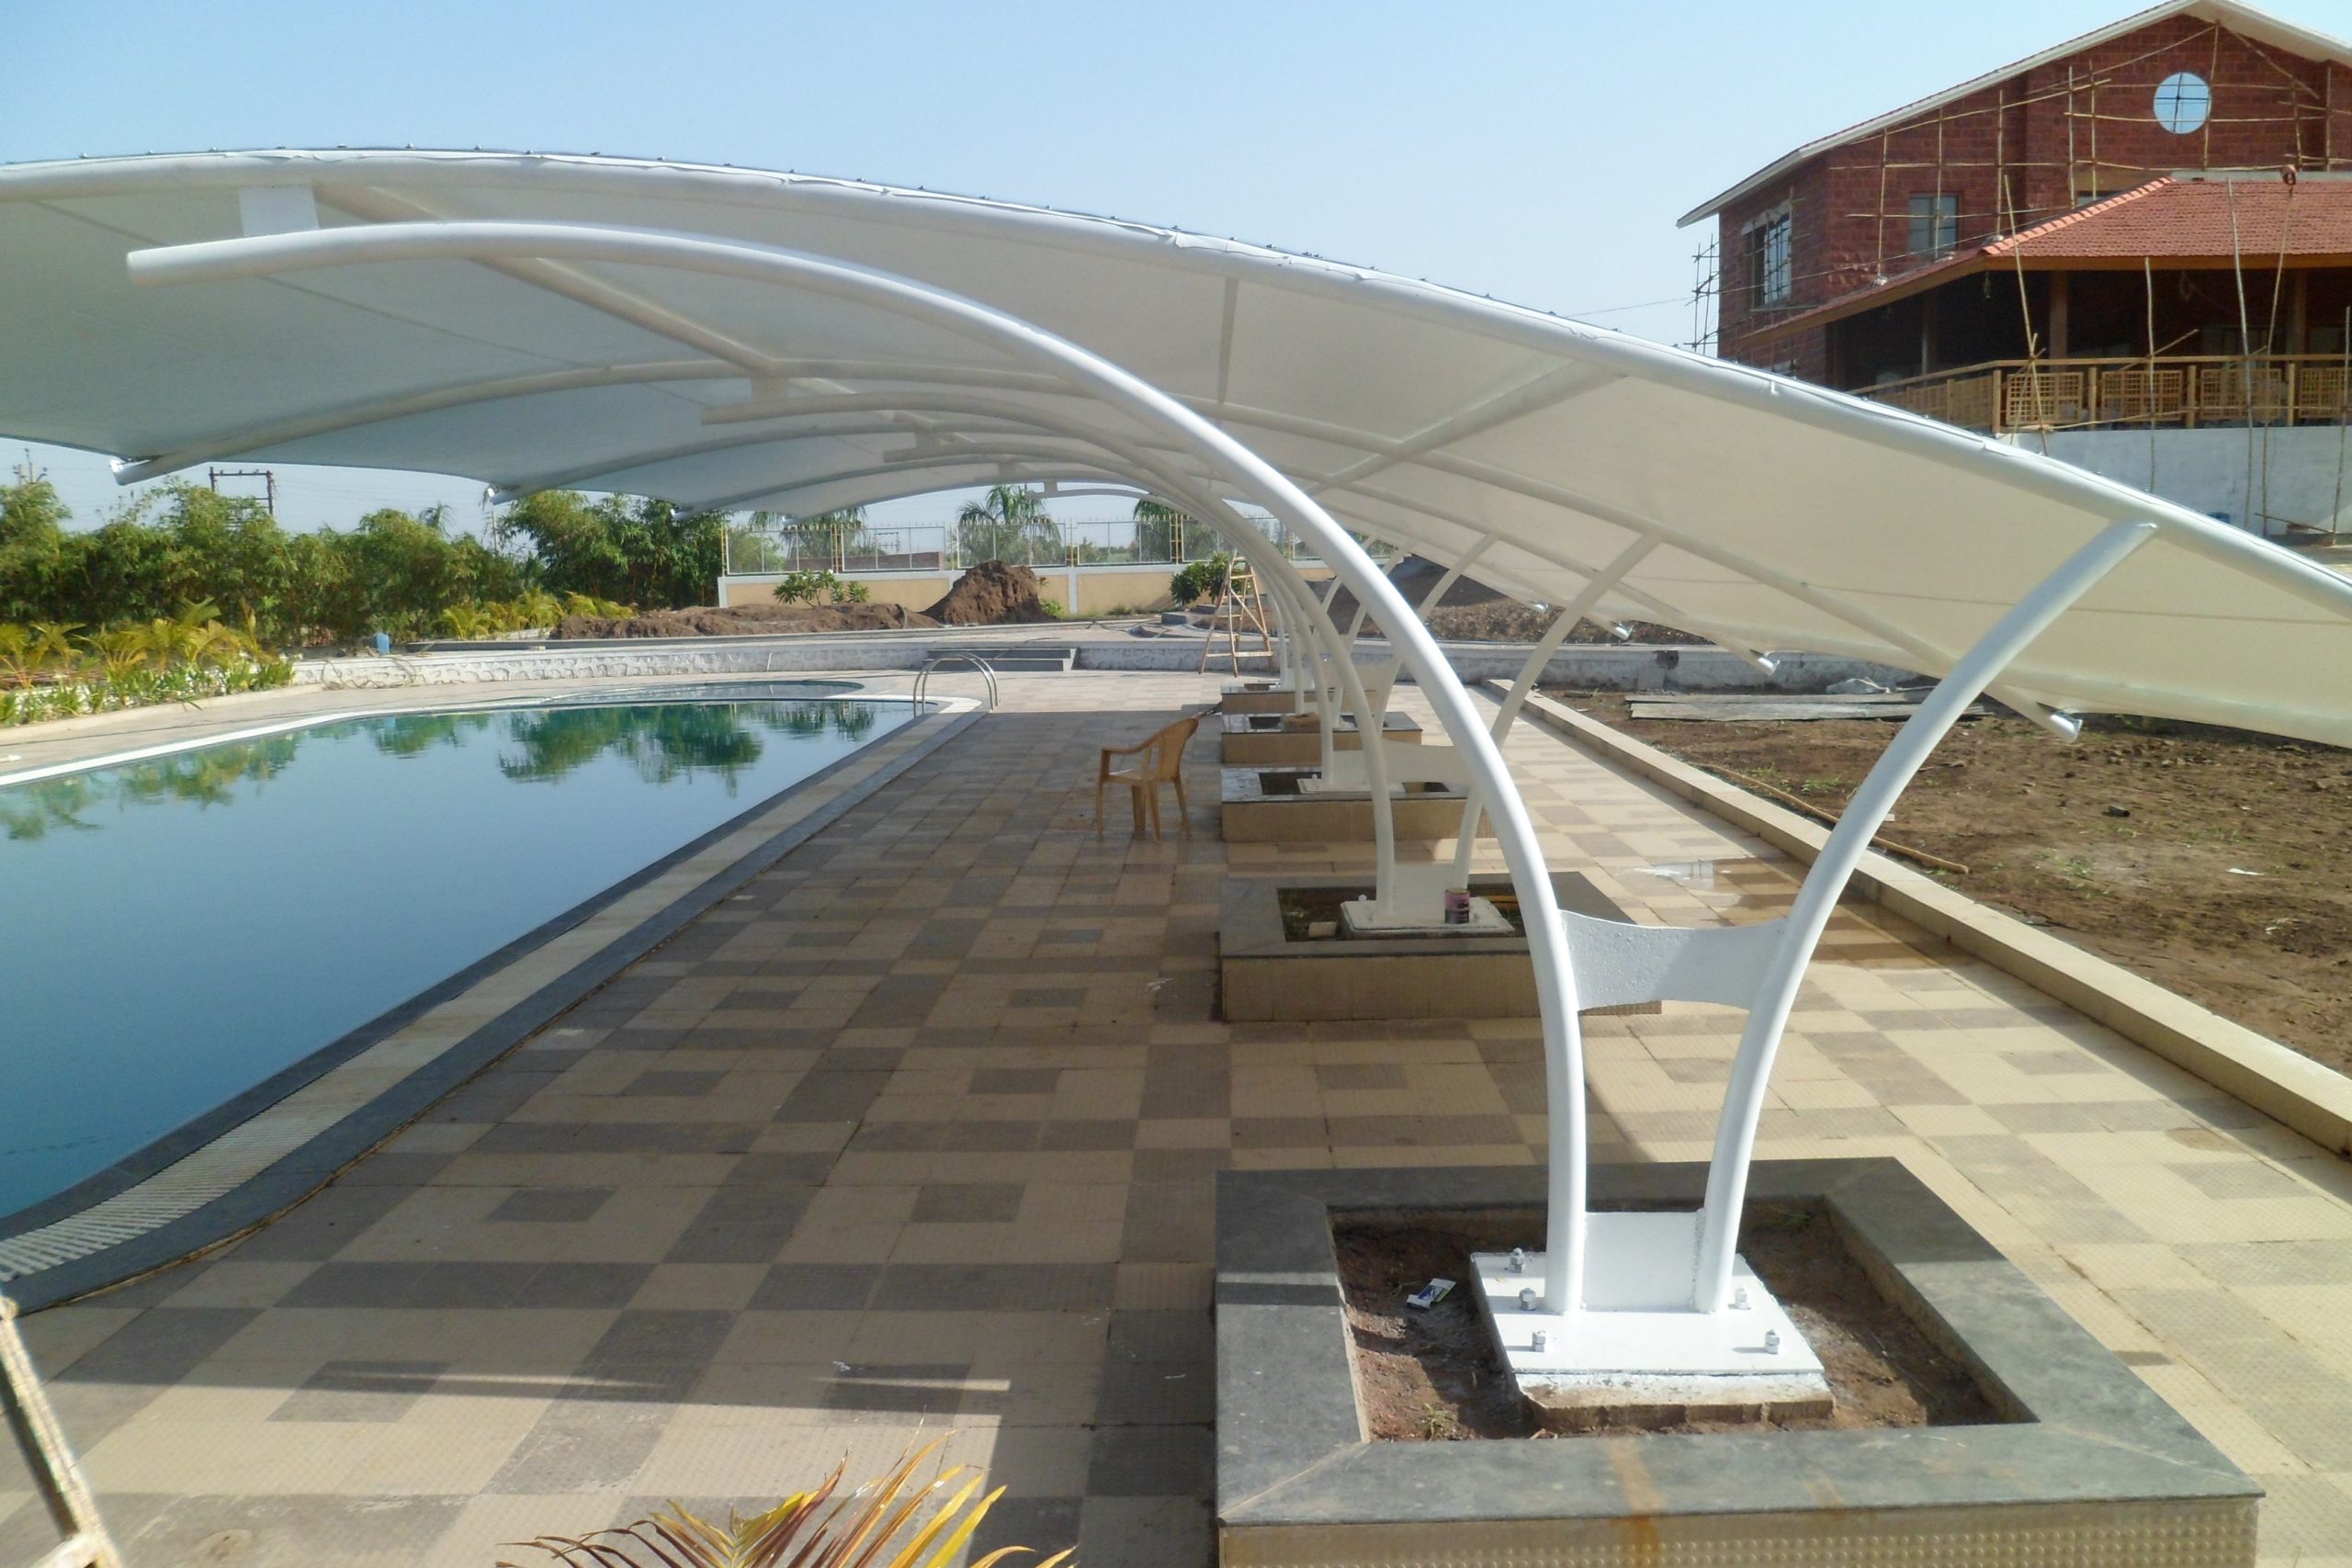 Tensile Fabric Shade Manufacturers & Suppliers in UAE